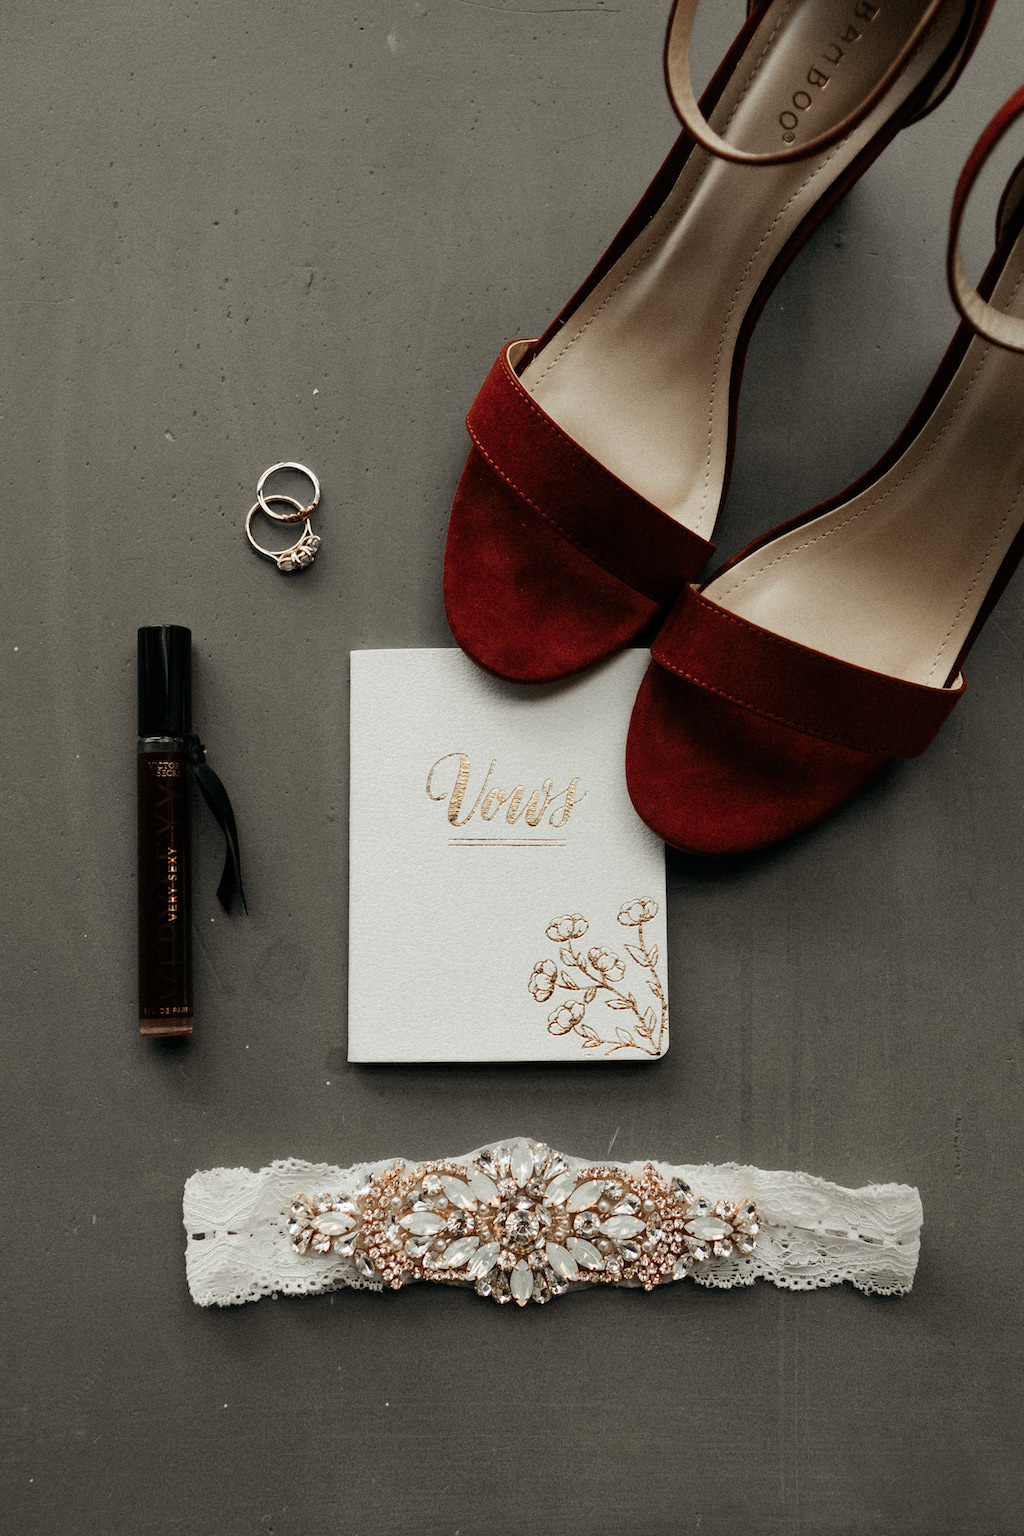 Bride Wedding Accessories, Red Velvet Strappy Sandal Heel Wedding Shoes, White and Gold Foil Vows Book, White Lace, Rose Gold and Rhinestone Brooch Garter, Wedding Rings